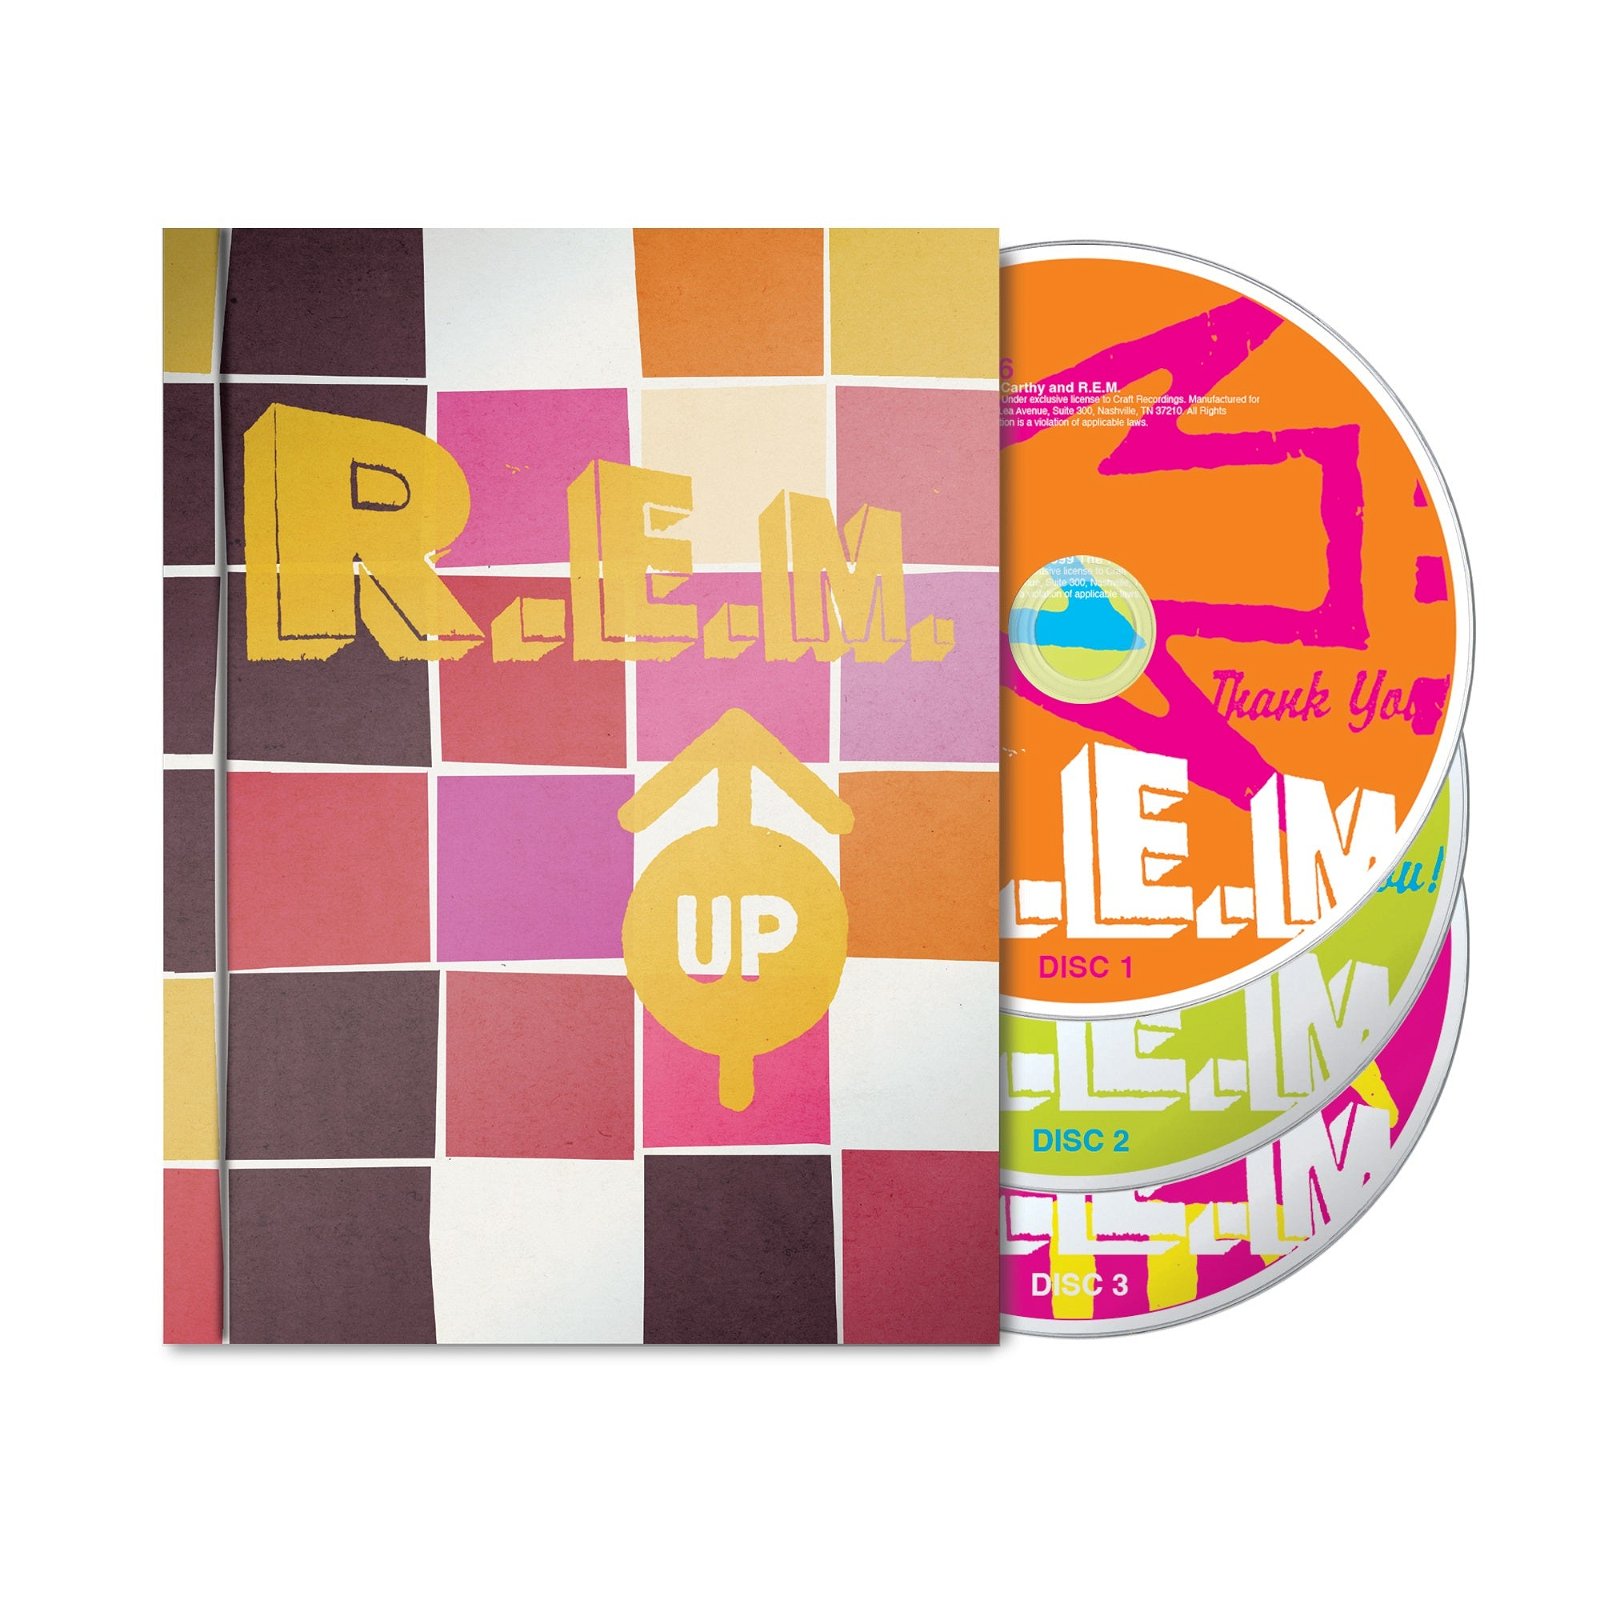 CD Shop - REM UP / 25TH ANNIVERSARY DELUXE EDITION / REMASTERED